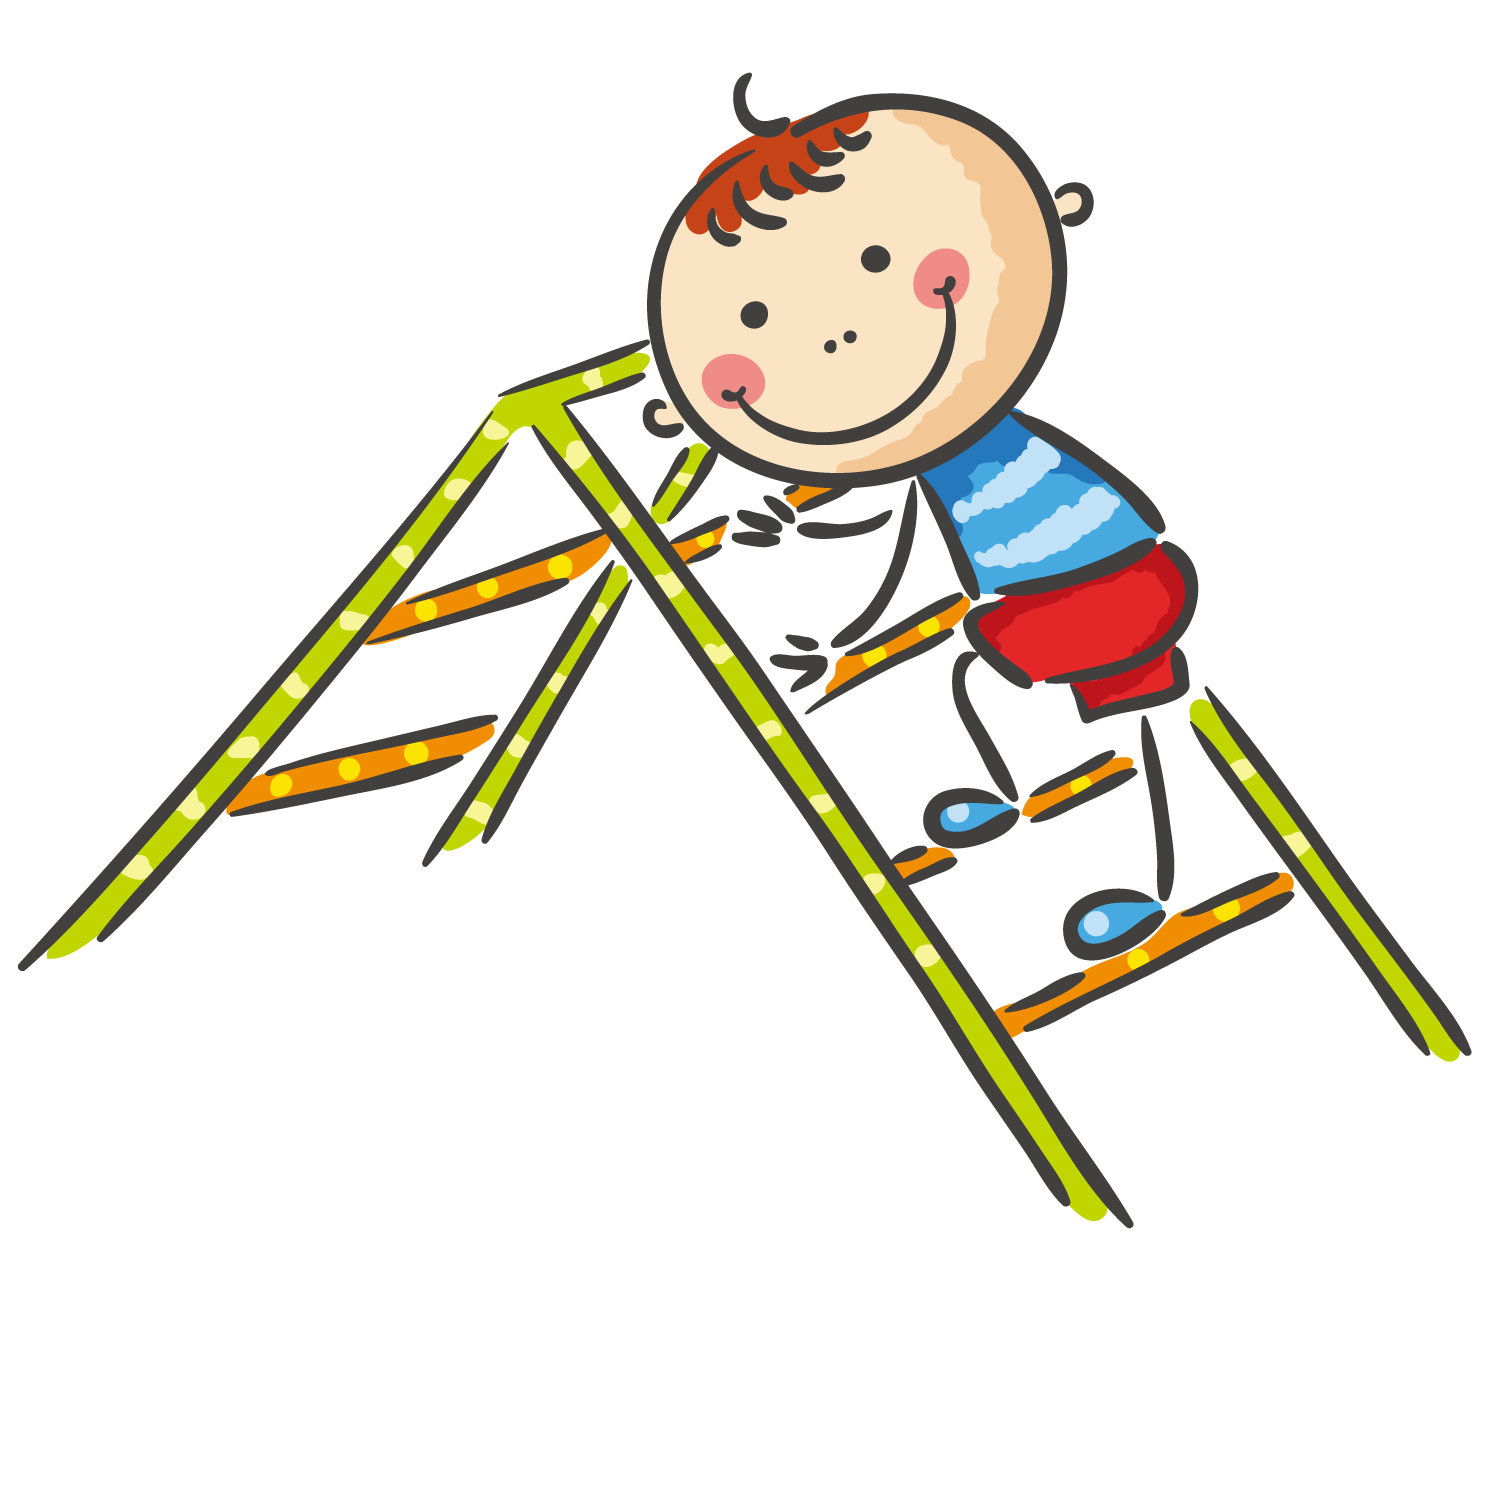 Ladder clipart line art. Playground free on dumielauxepices